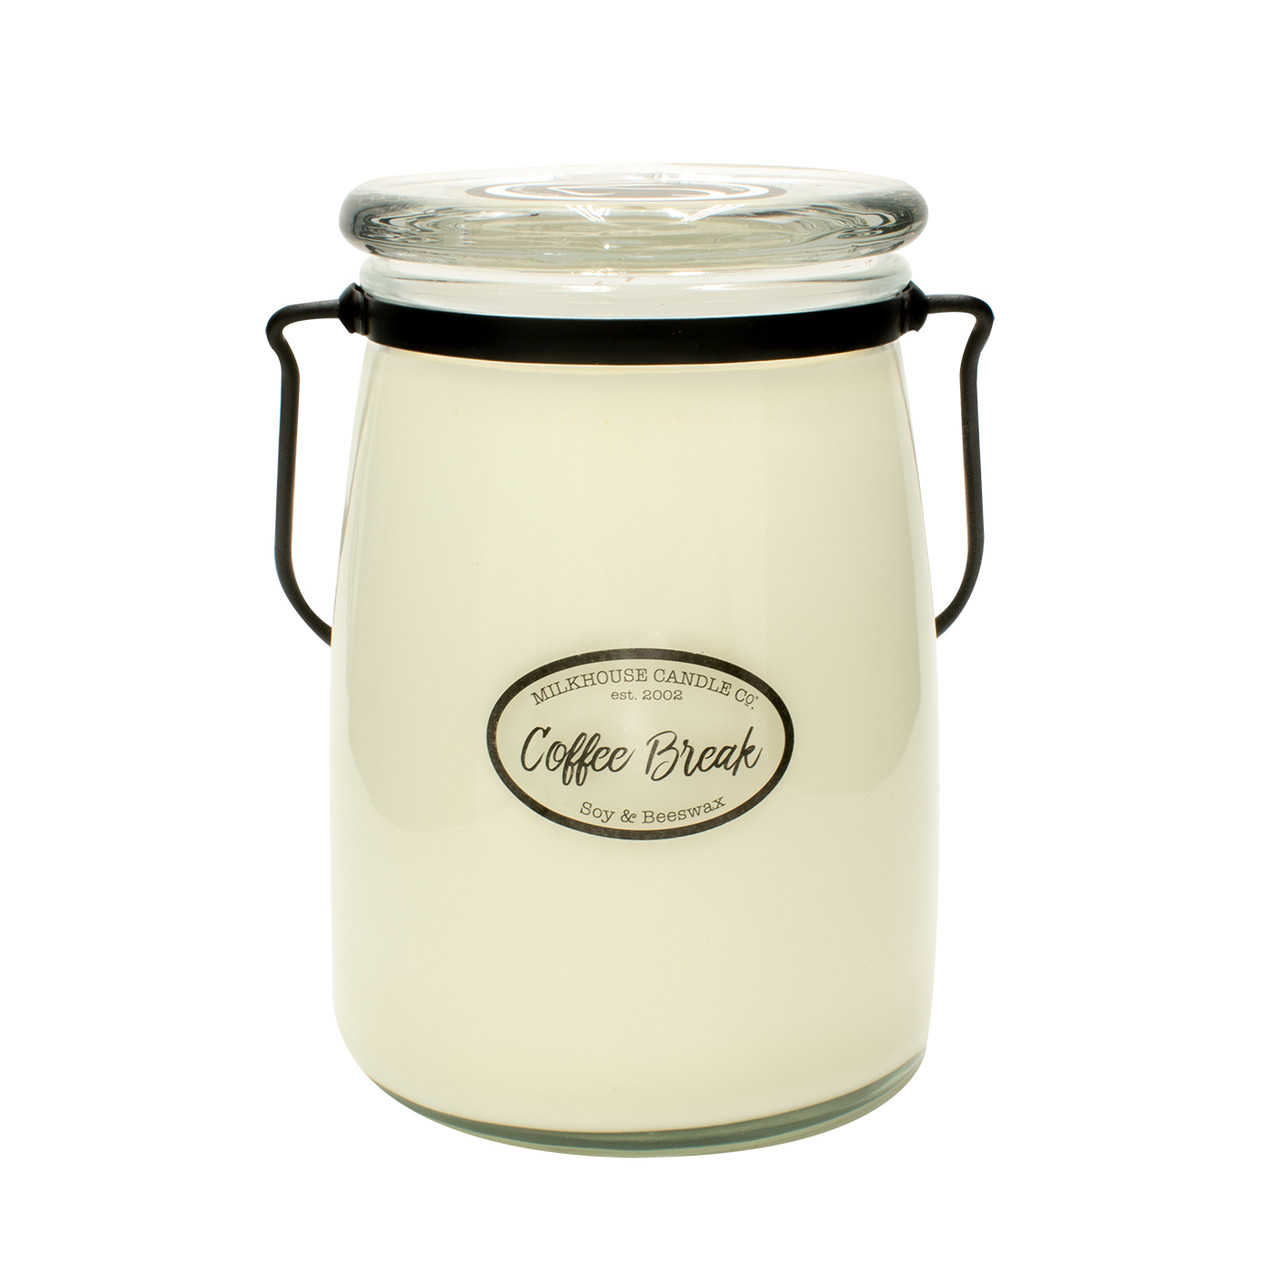 Milkhouse Candle Company, Creamery Scented Soy Candle: 16-Ounce